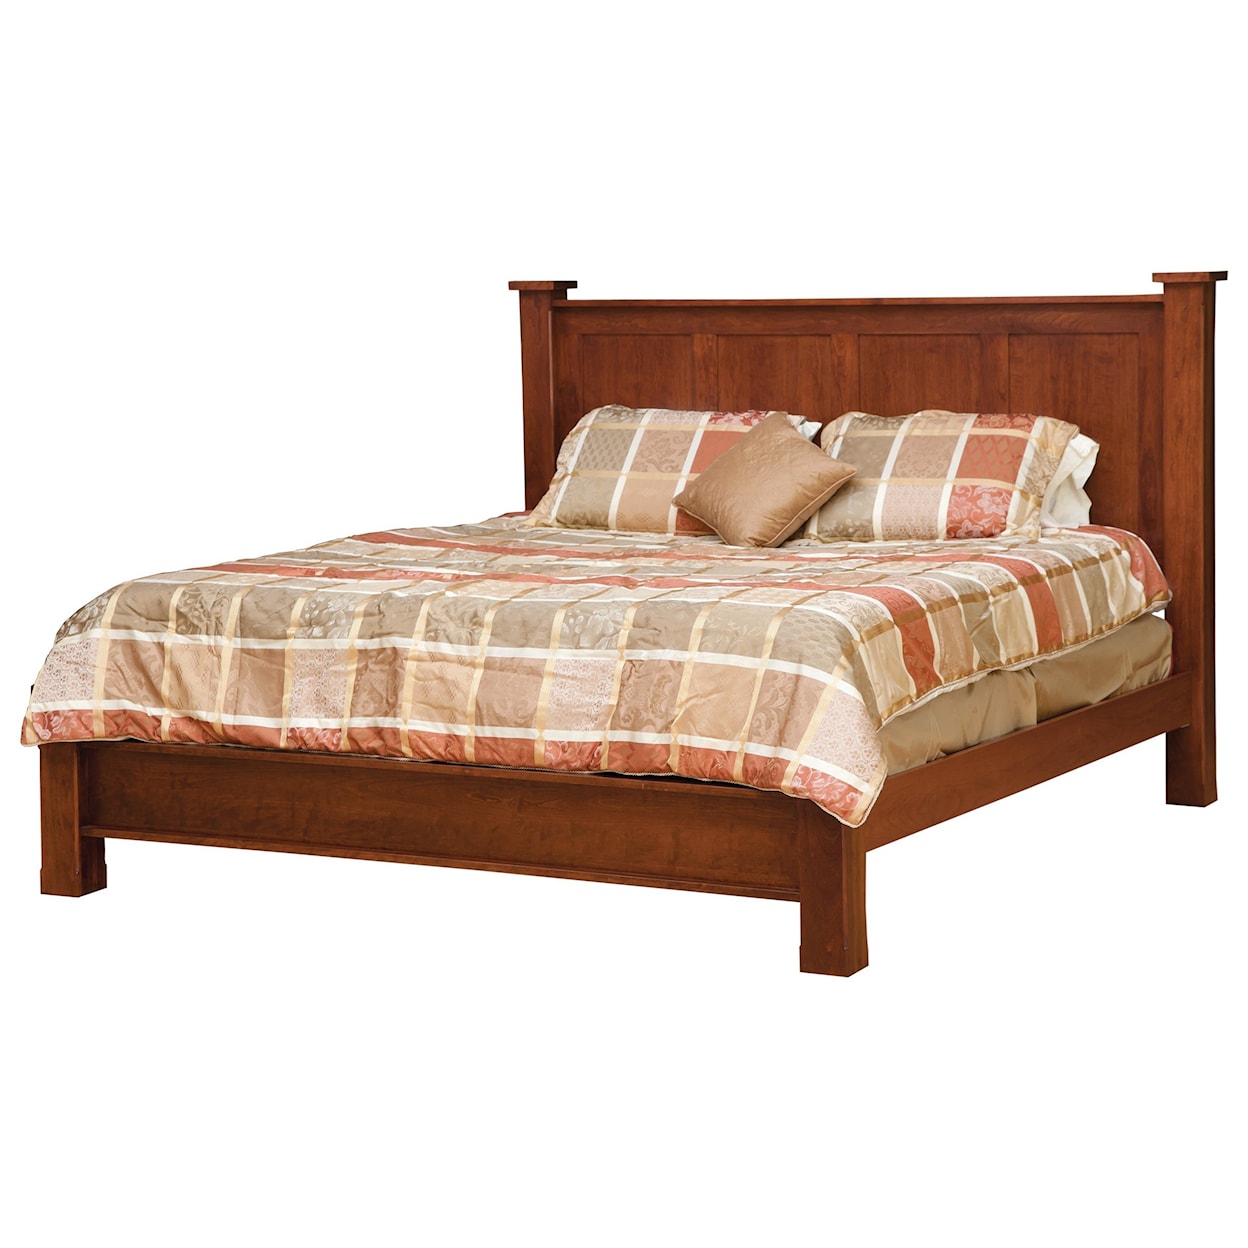 Daniels Amish Treasure Full Bed with Low Footboard